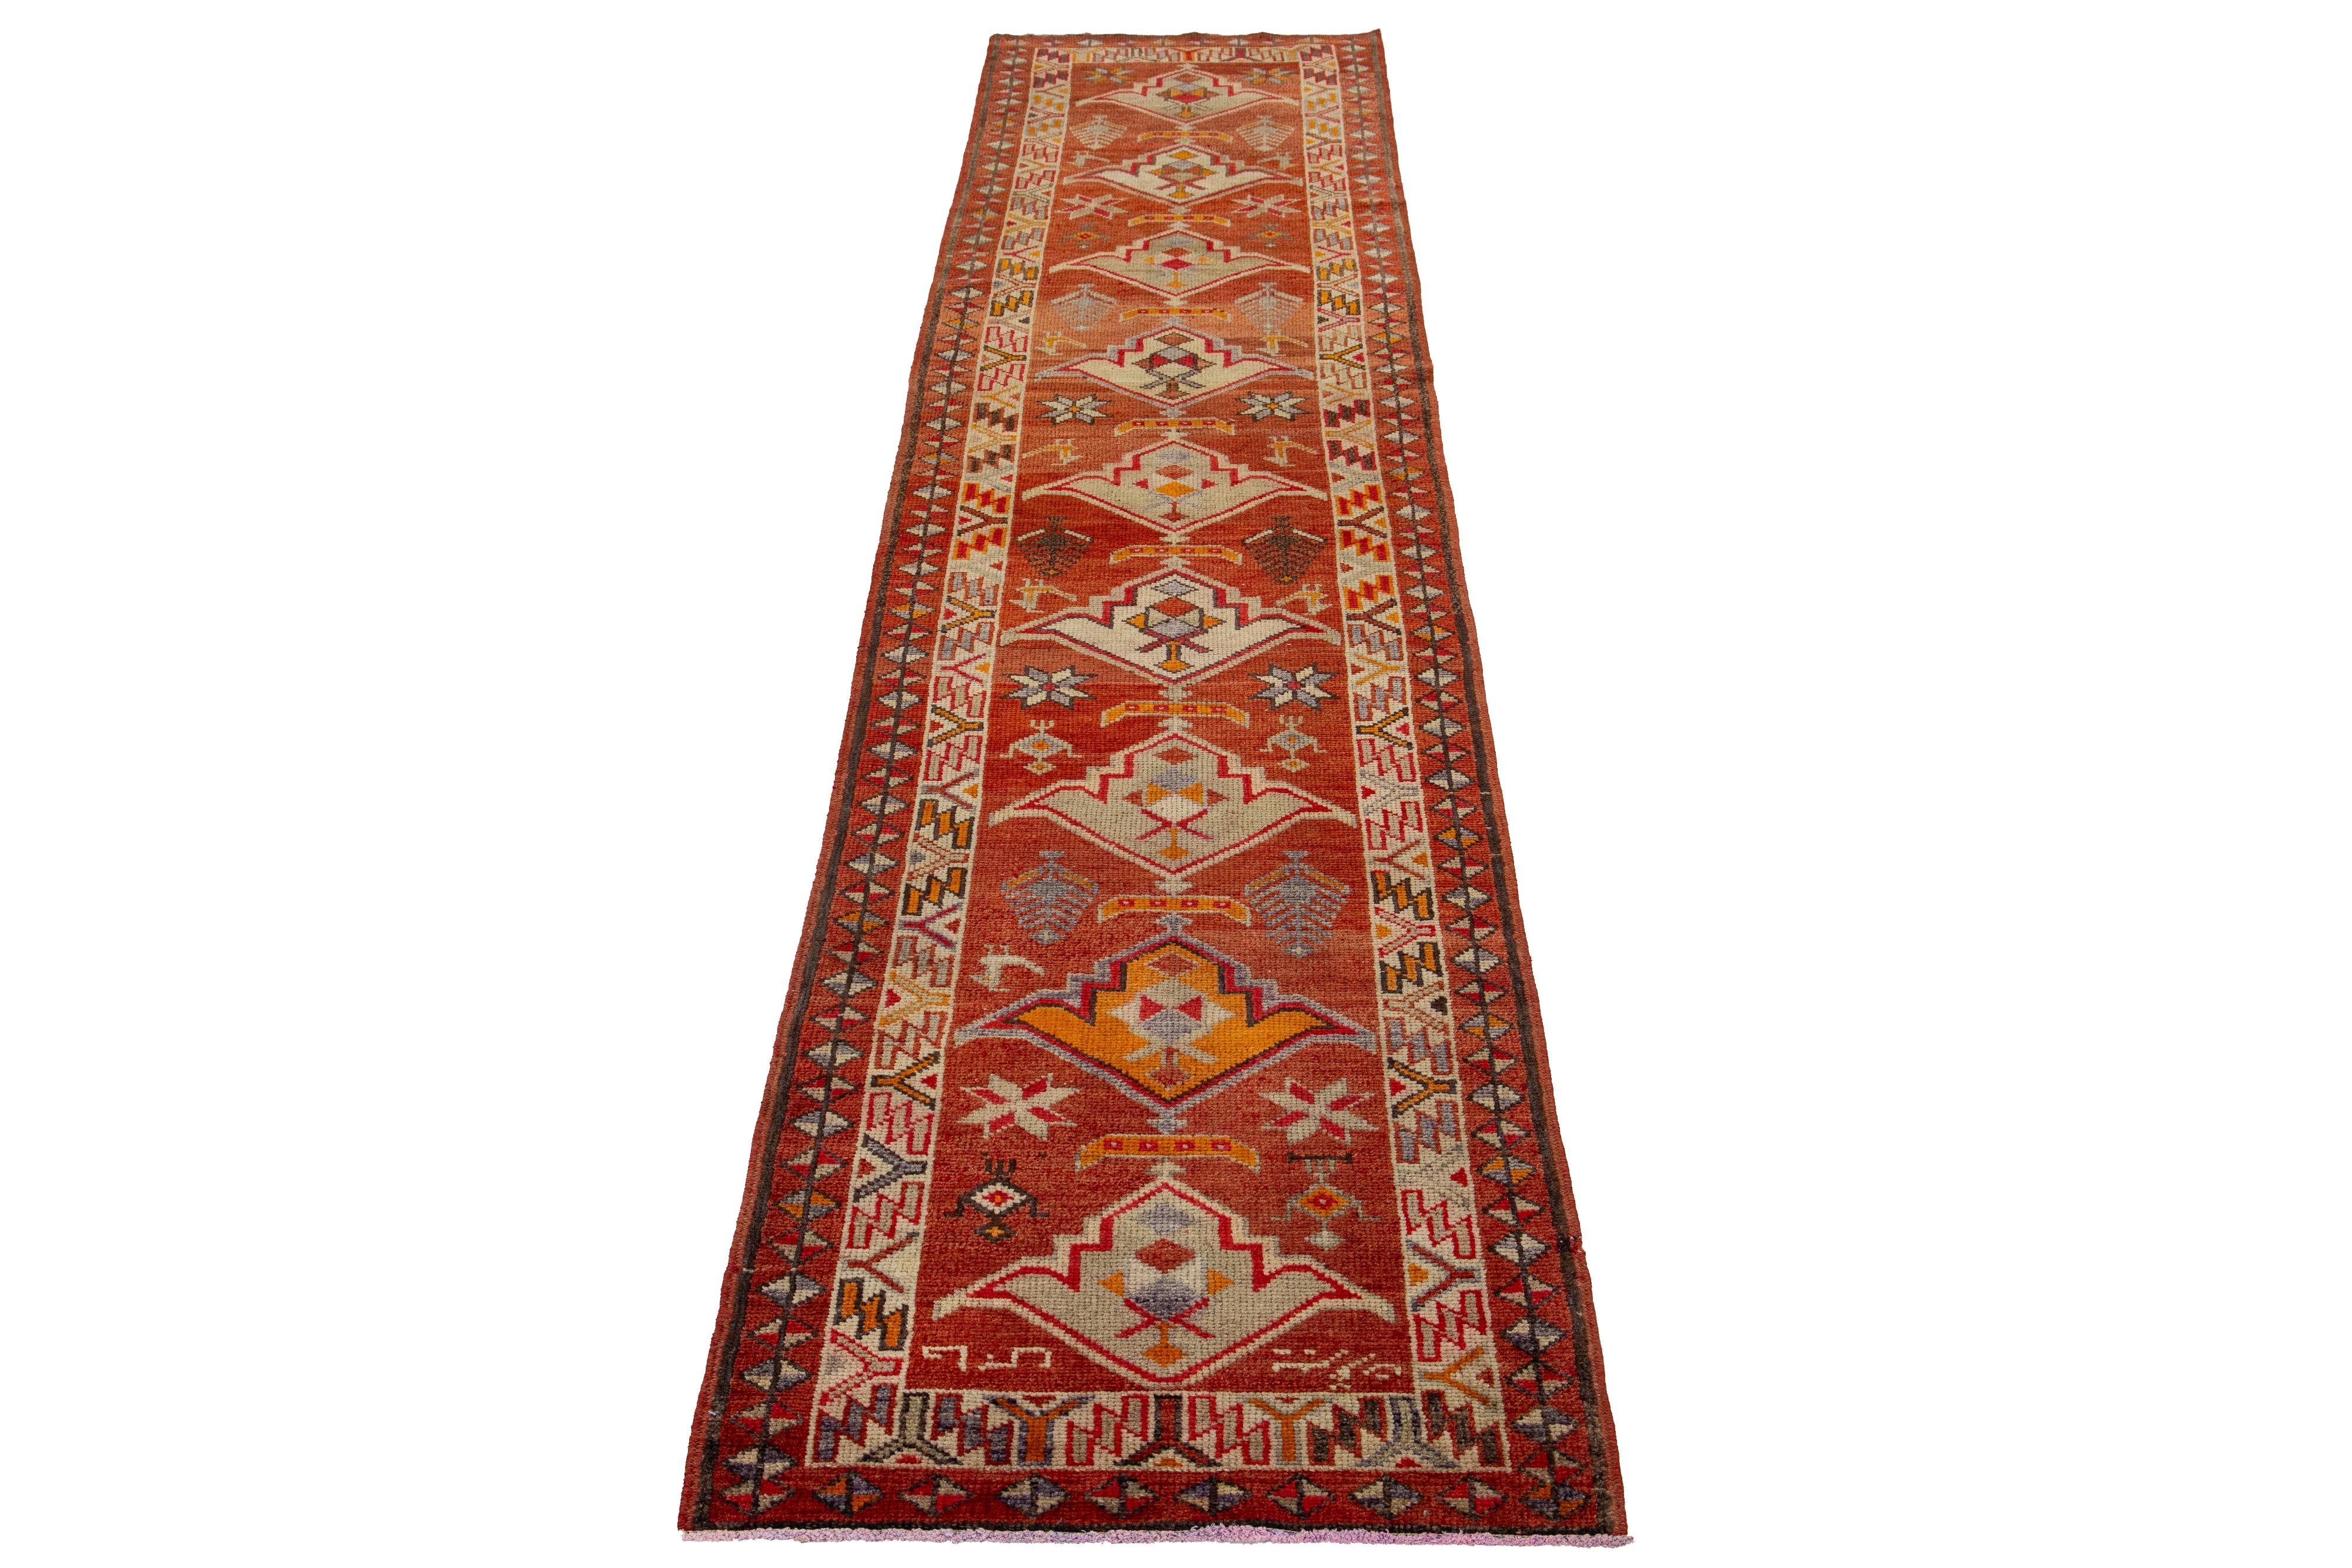 A beautiful modern Turkish runner featuring a red-rust field and a tribal geometric design that covers the entire rug, with accents in multiple colors.

This rug measures 2' 11